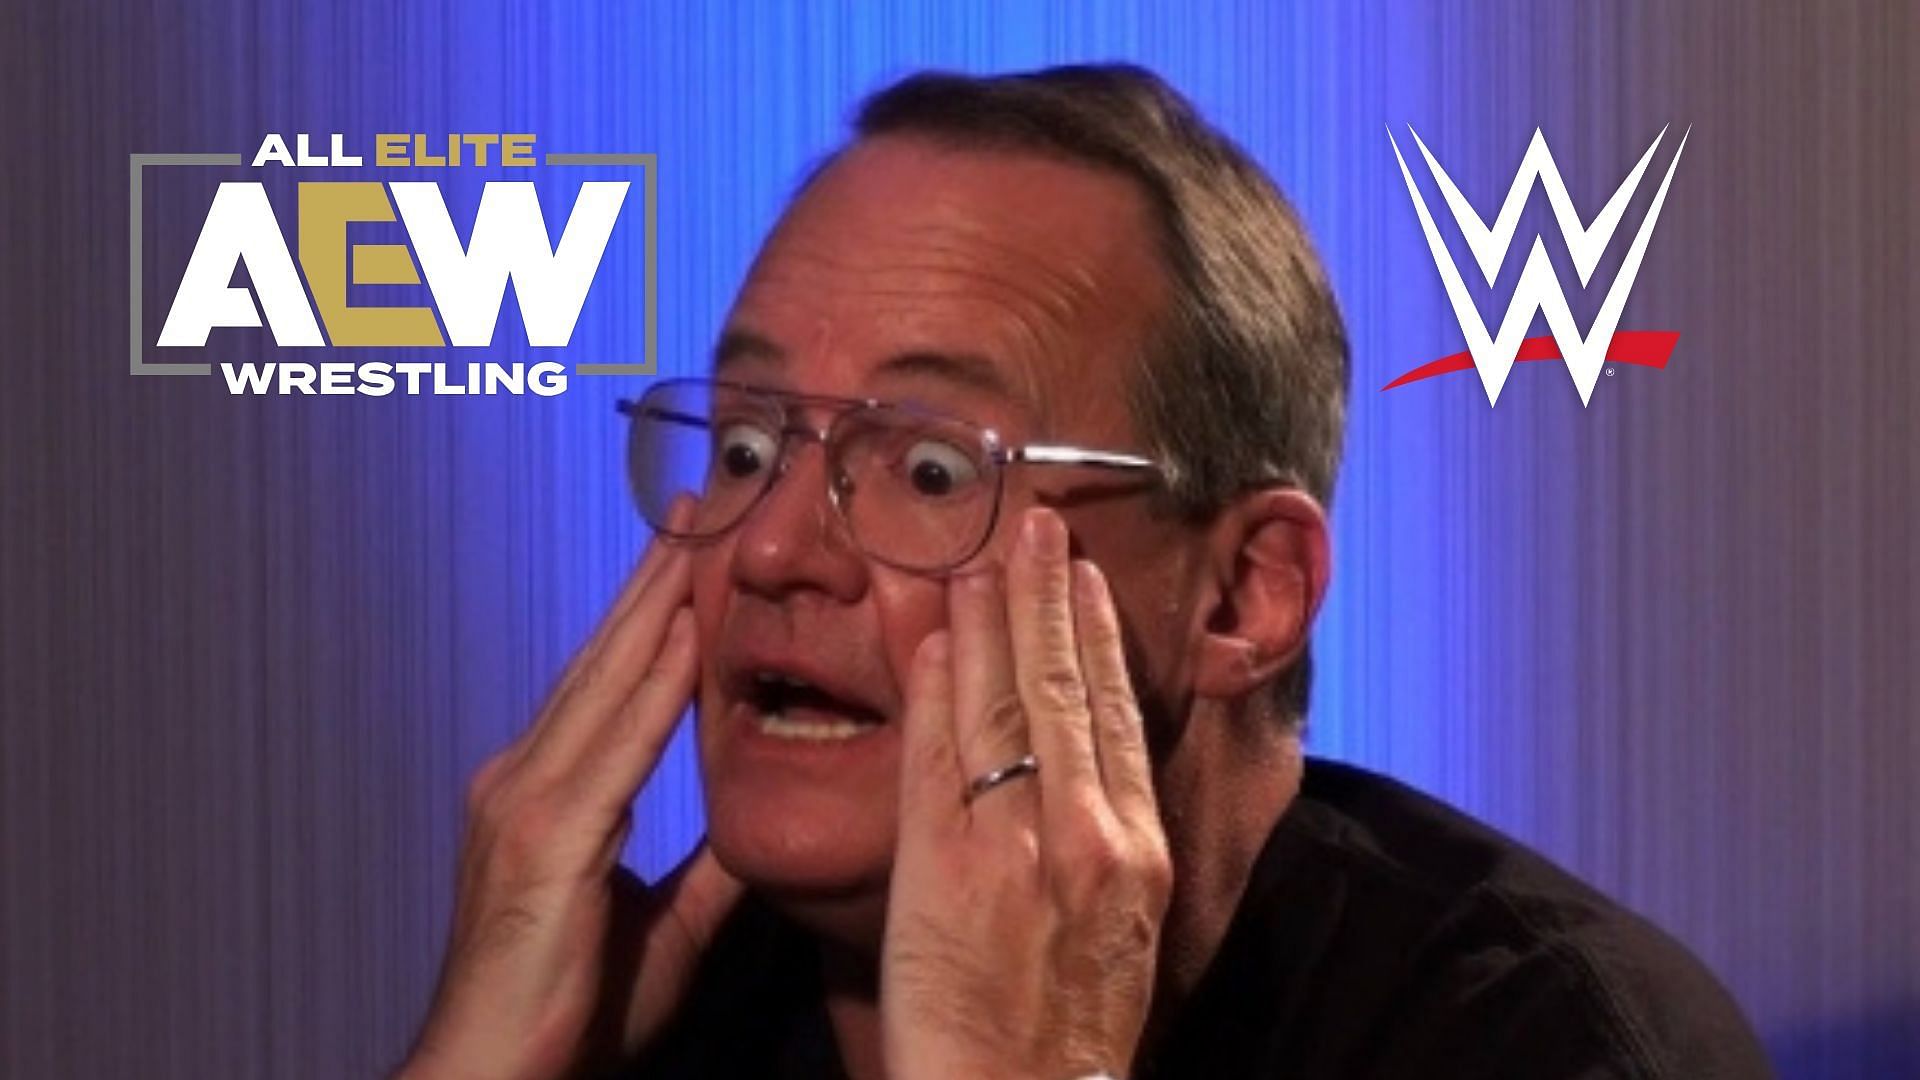 Jim Cornette has weighed in on AEW stars appearing backstage in WWE